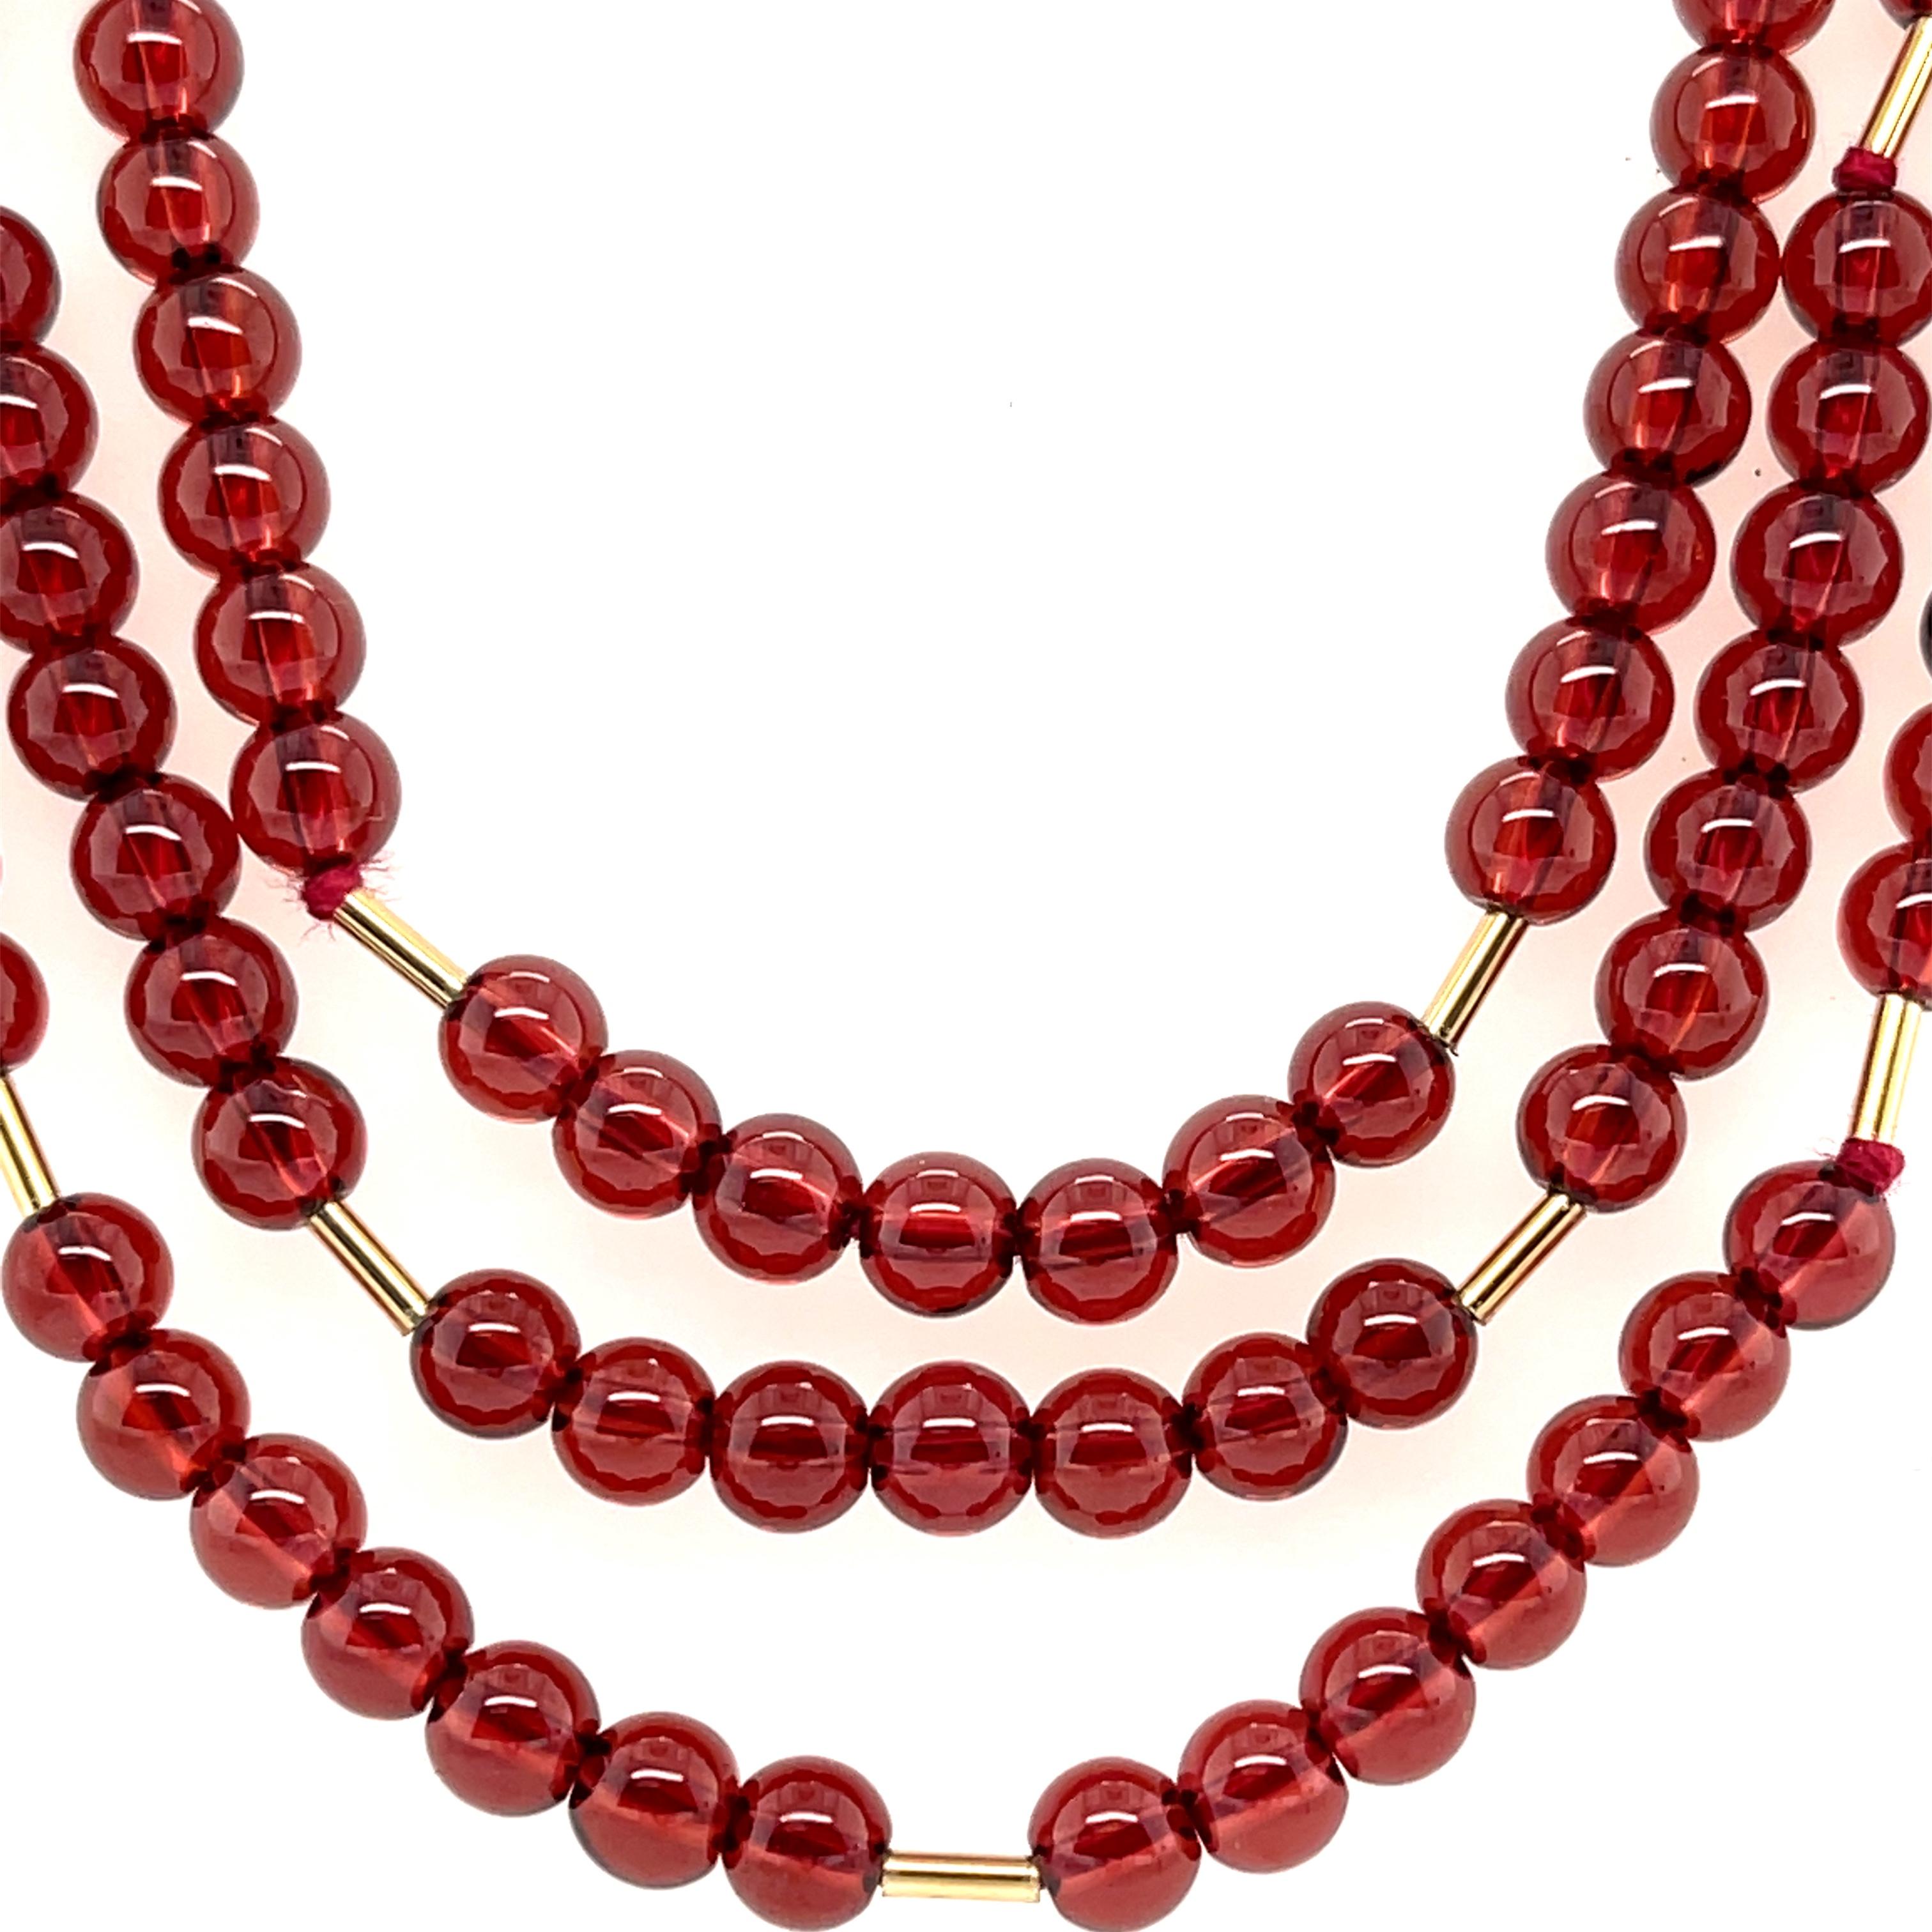 Bead Cranberry Garnet Rope Necklace with Yellow Gold Accents & Clasp, 54 Inches For Sale